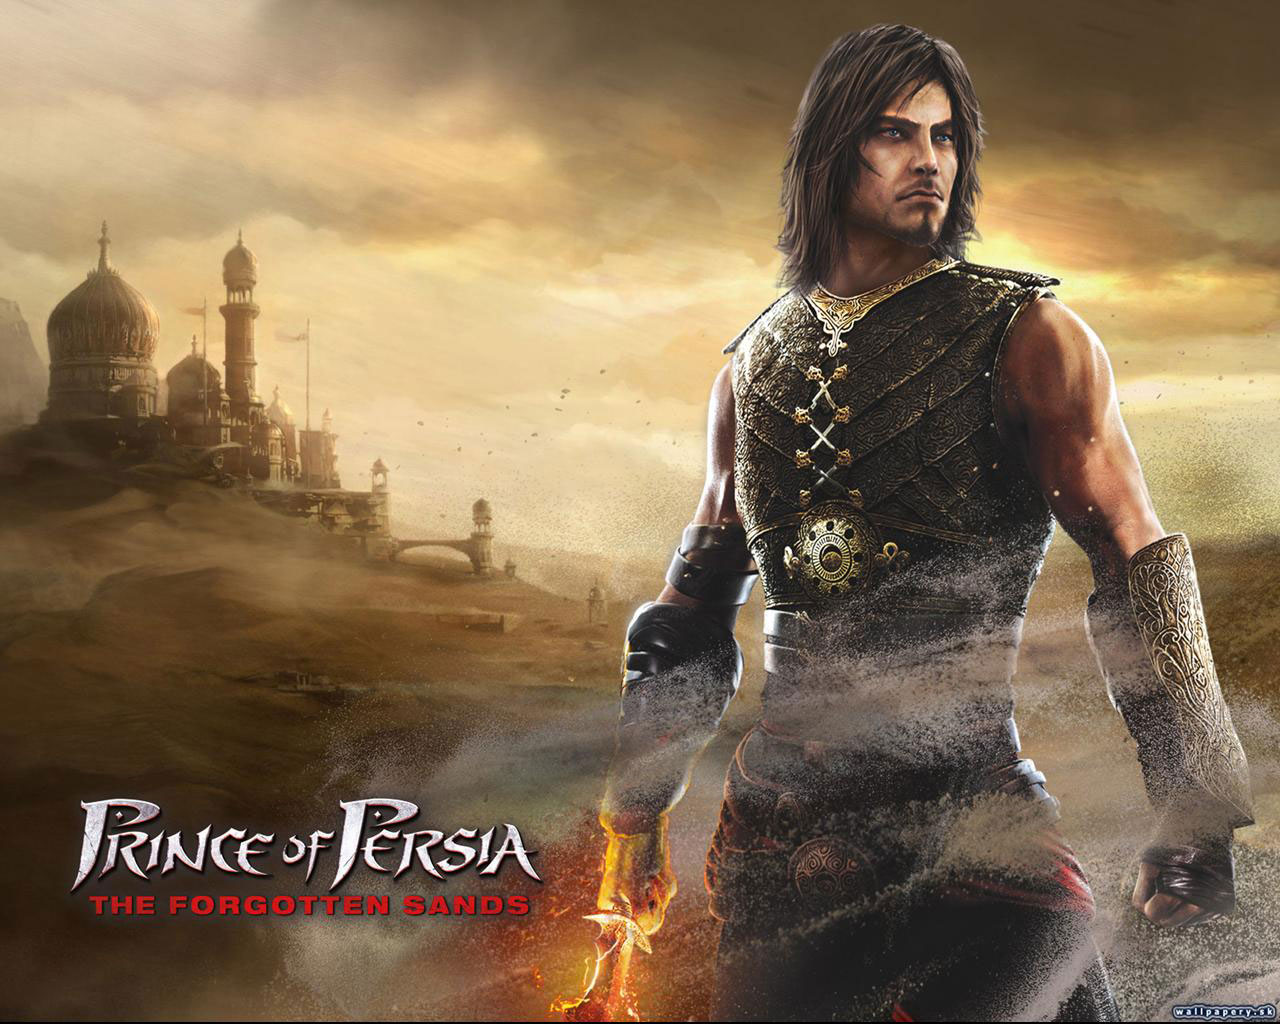 Prince of Persia The Forgotten Sands pc org 9 - سی دی کی اورجینال Prince of Persia: The Forgotten Sands برای PC